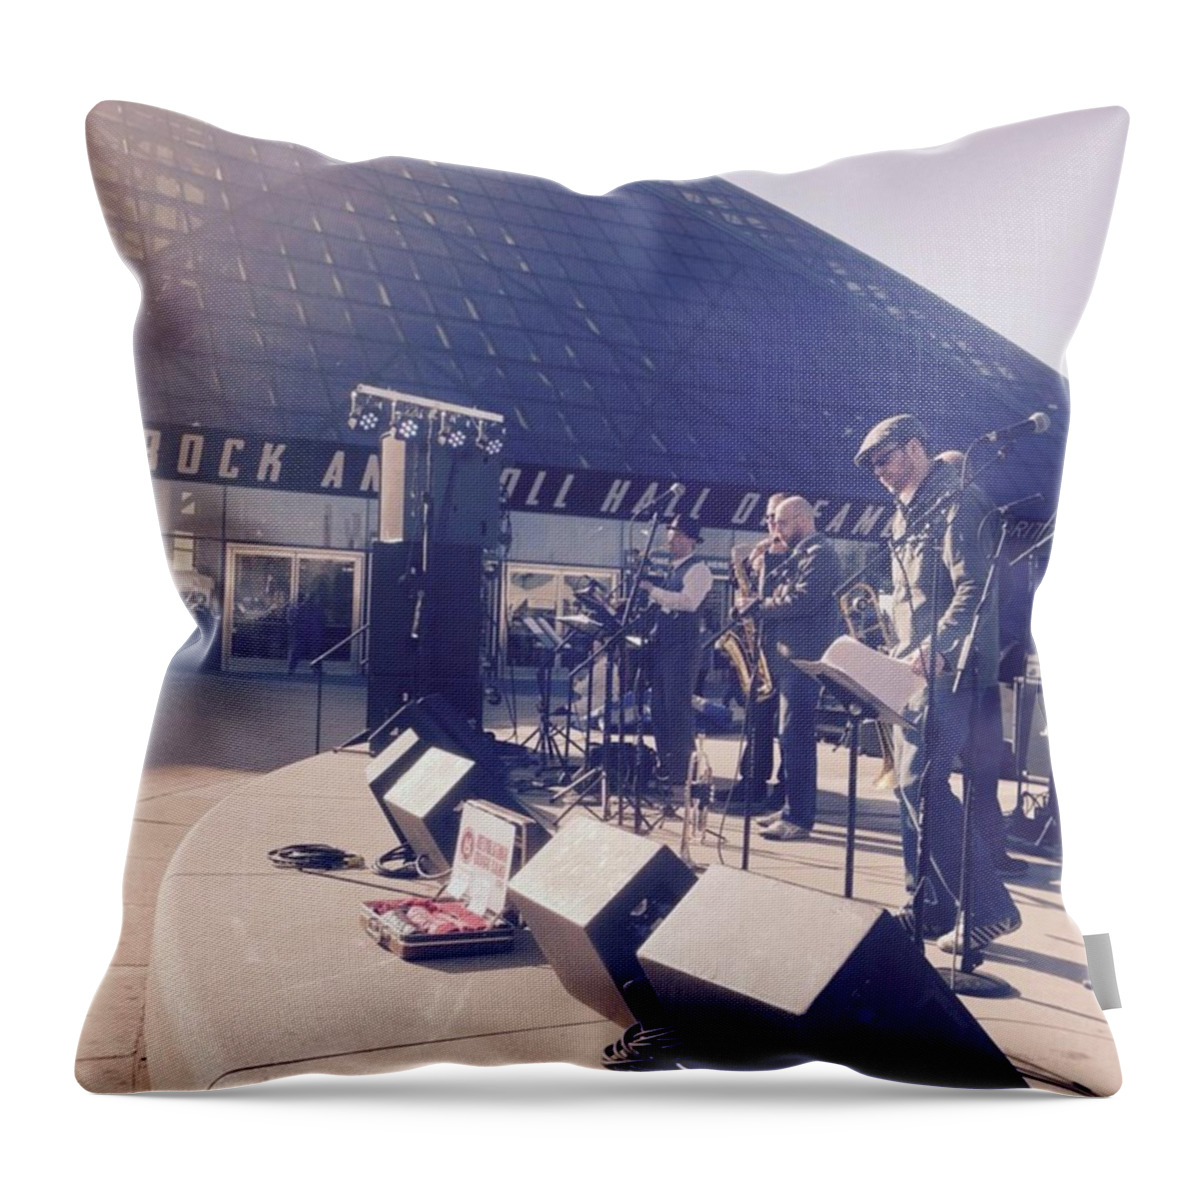  Throw Pillow featuring the photograph At The Rock N Roll Hall by Dale Kincaid